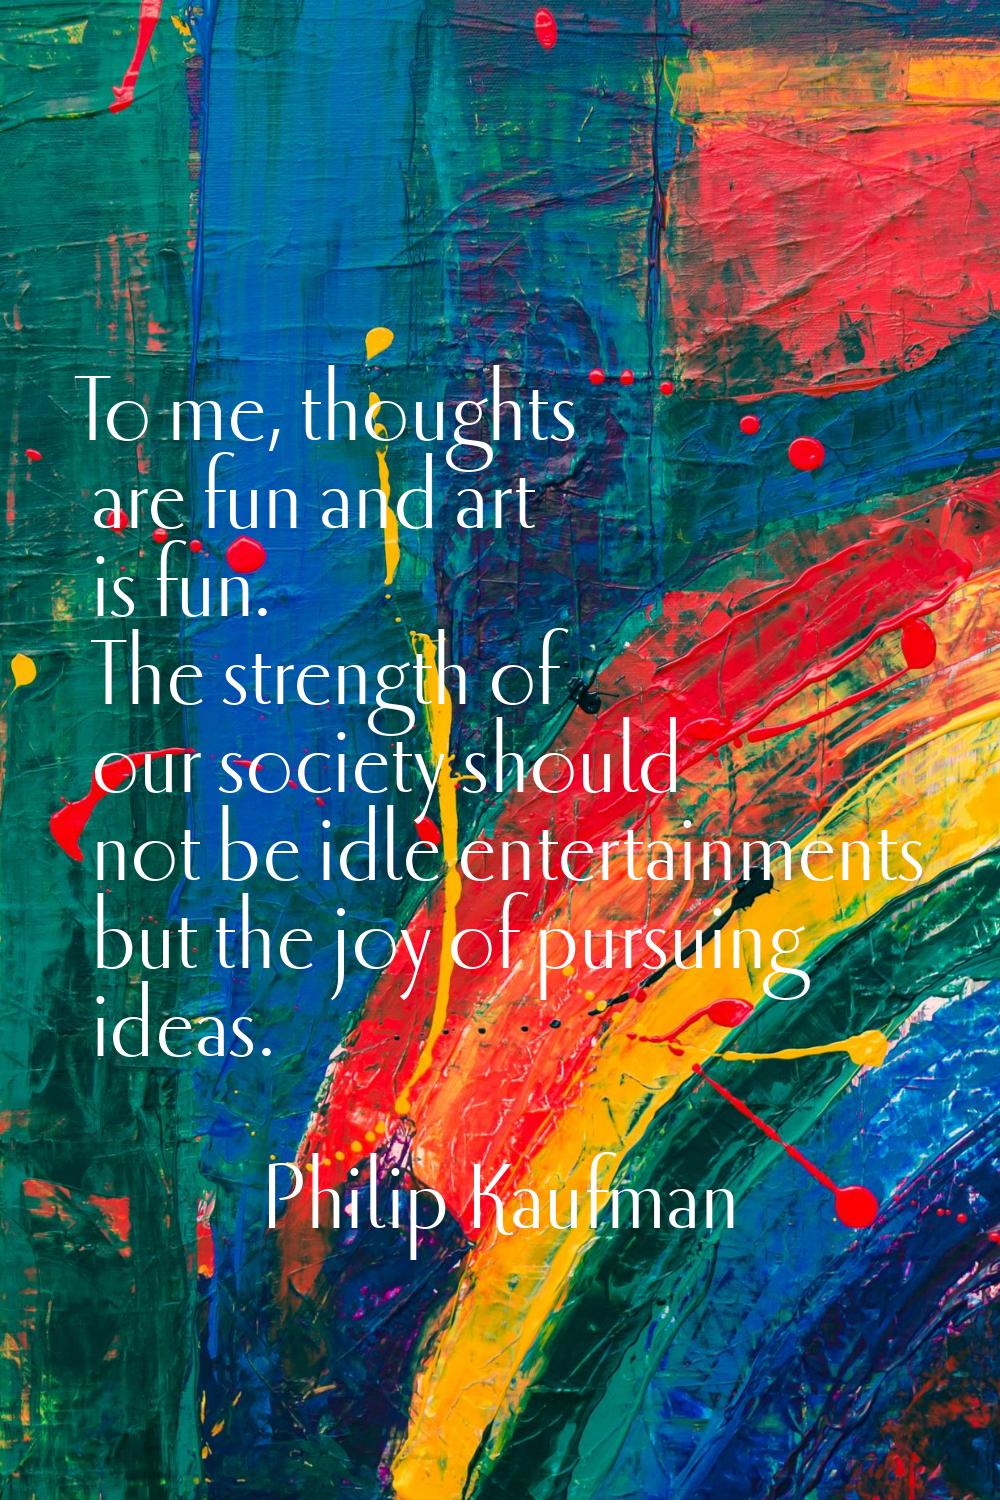 To me, thoughts are fun and art is fun. The strength of our society should not be idle entertainmen